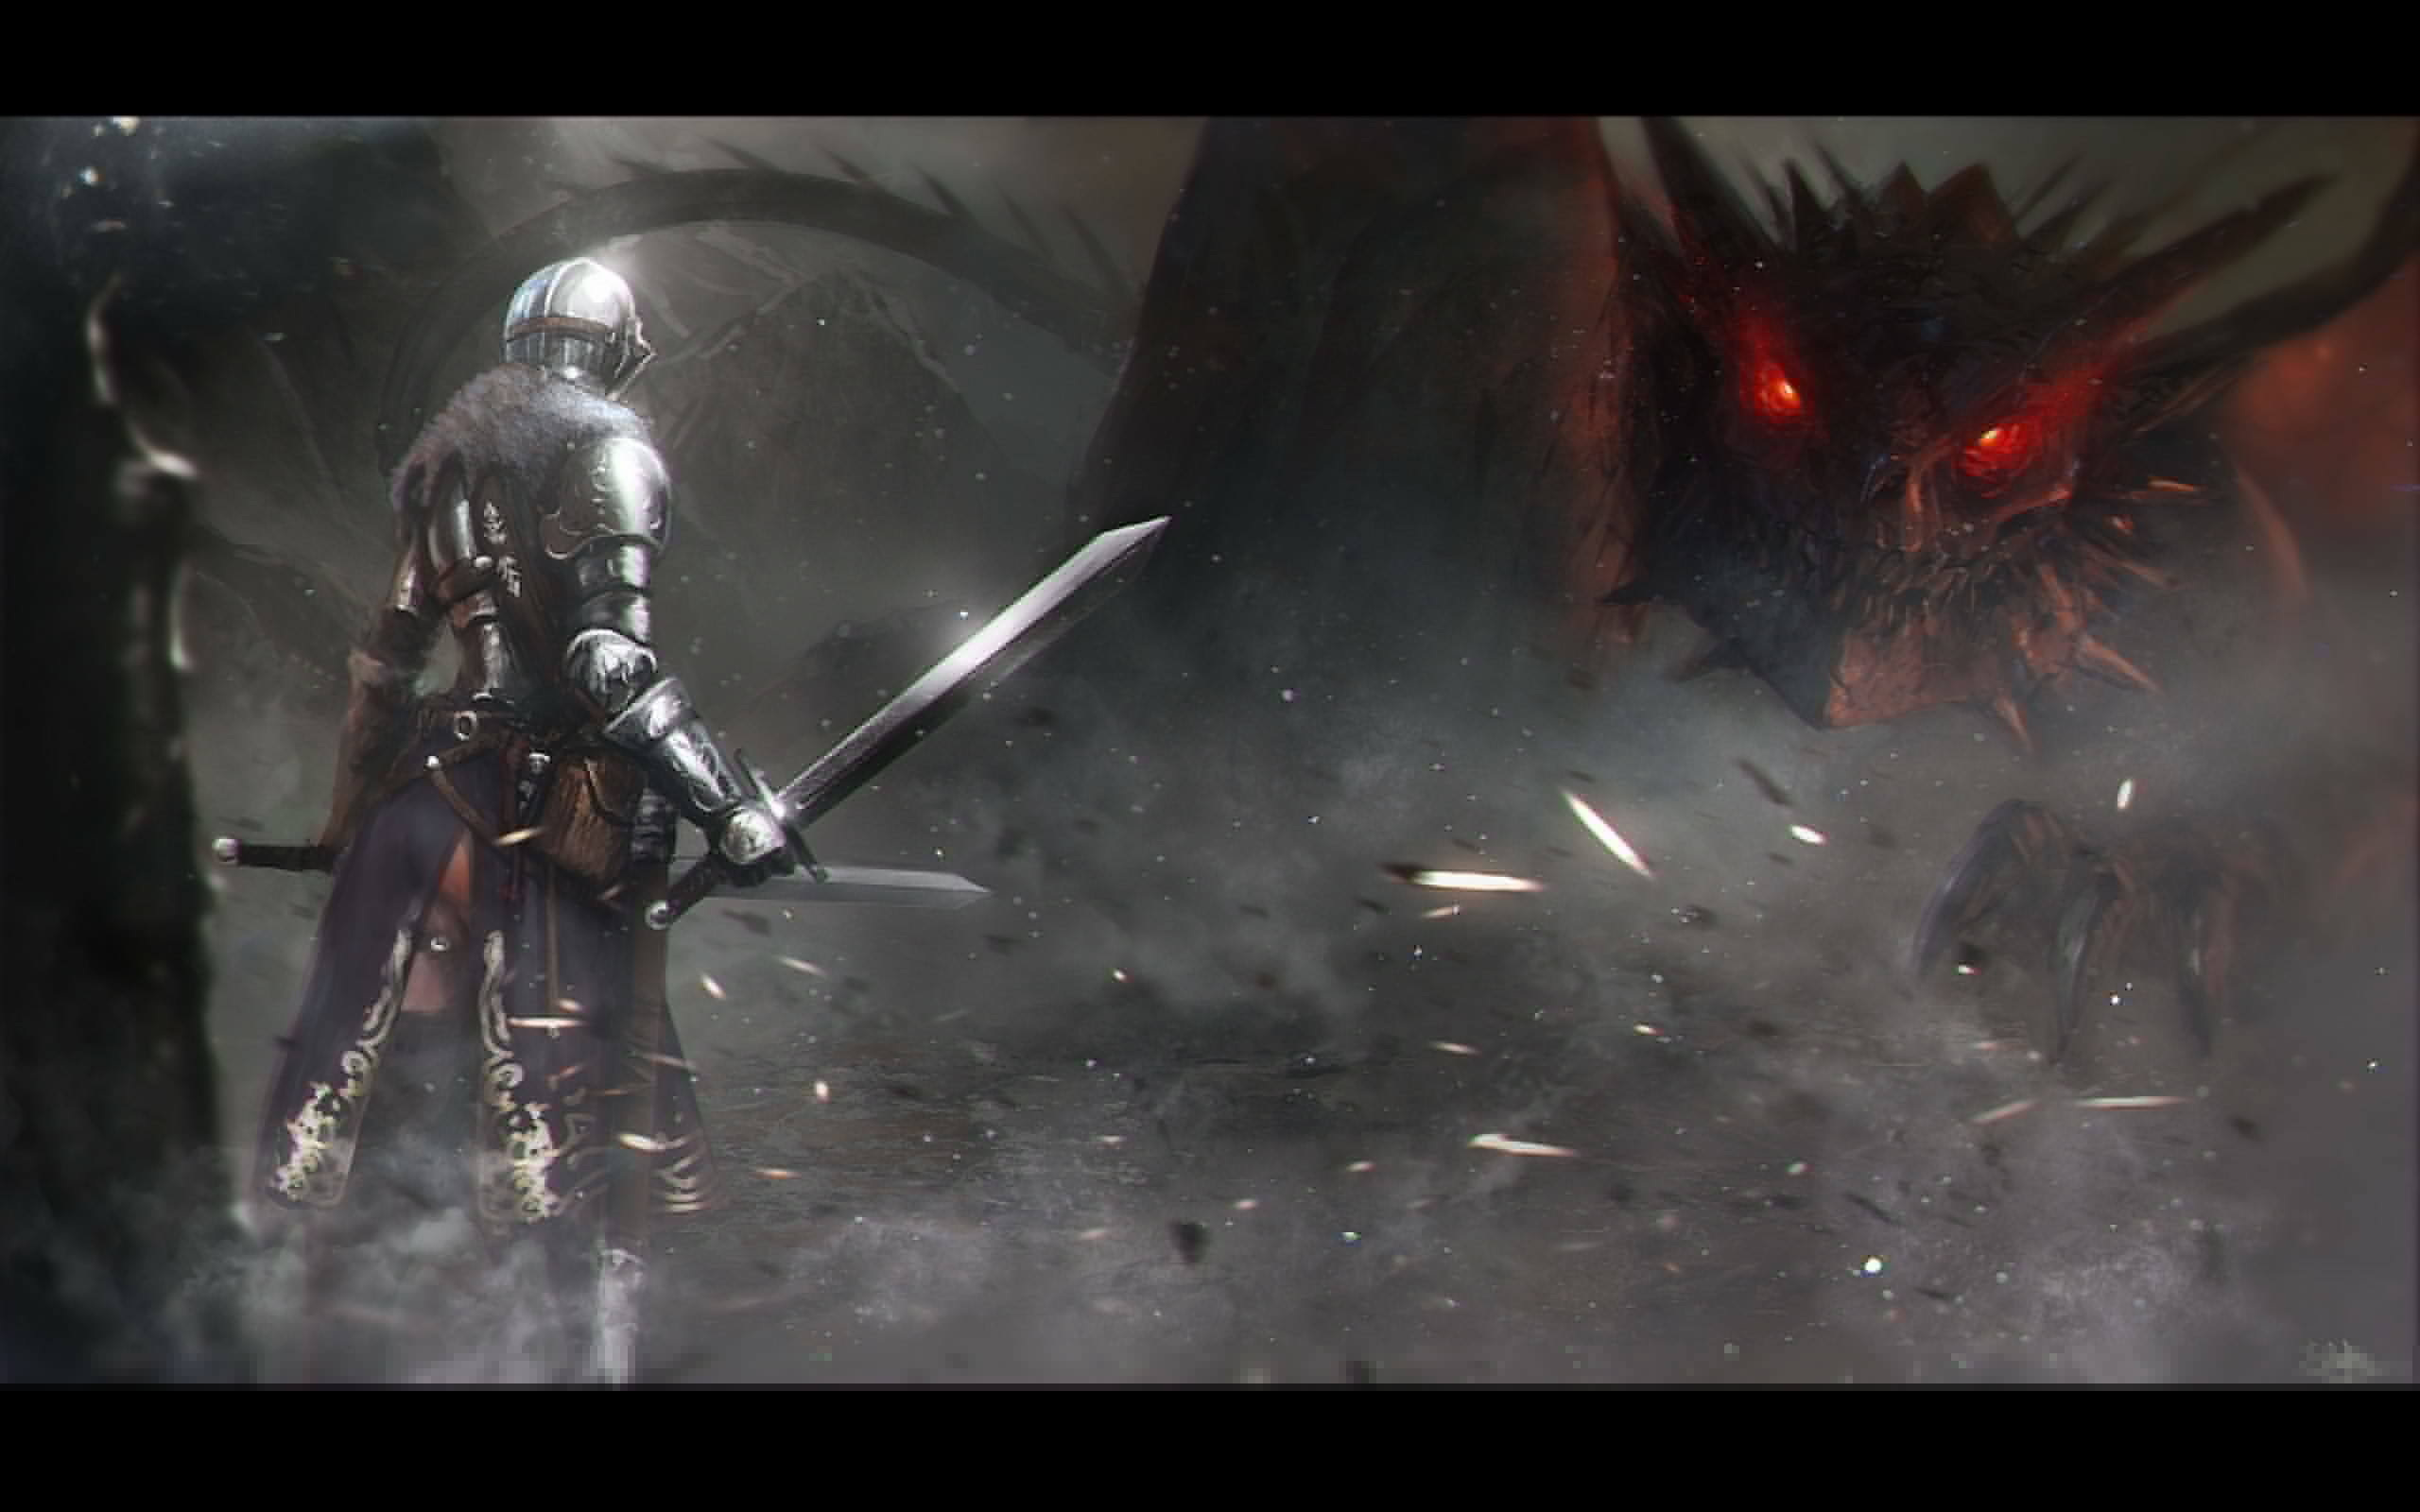 2560x1600 Battle Knight Weapons Sword Warrior Dragon Wallpaper At Fantasy Wallpapers